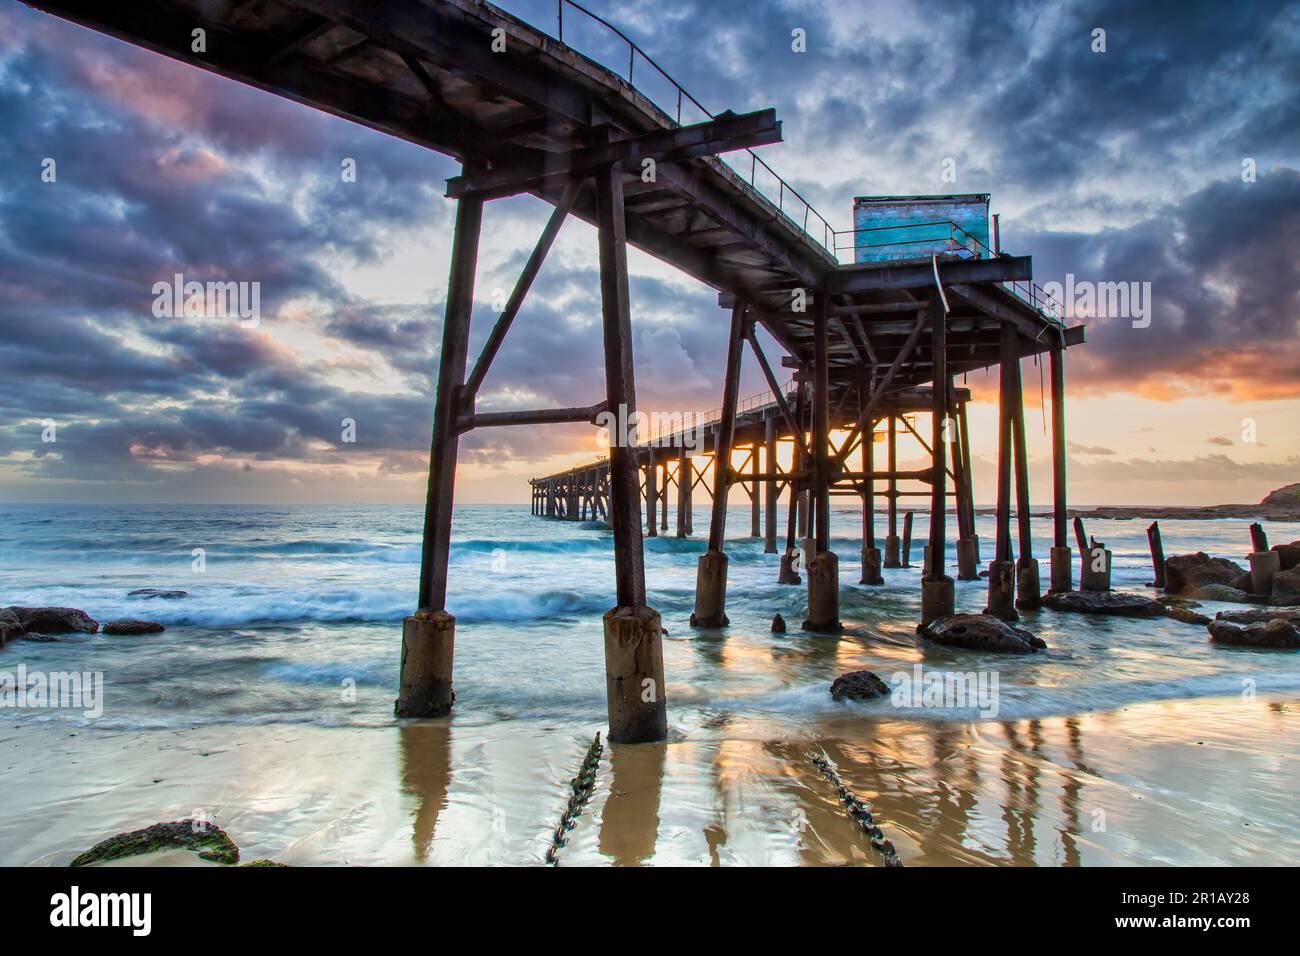 Under long historic timber jetty at Middle camp beach in Catherine Hill bay coastal town of Australia at sunrise. Stock Photo